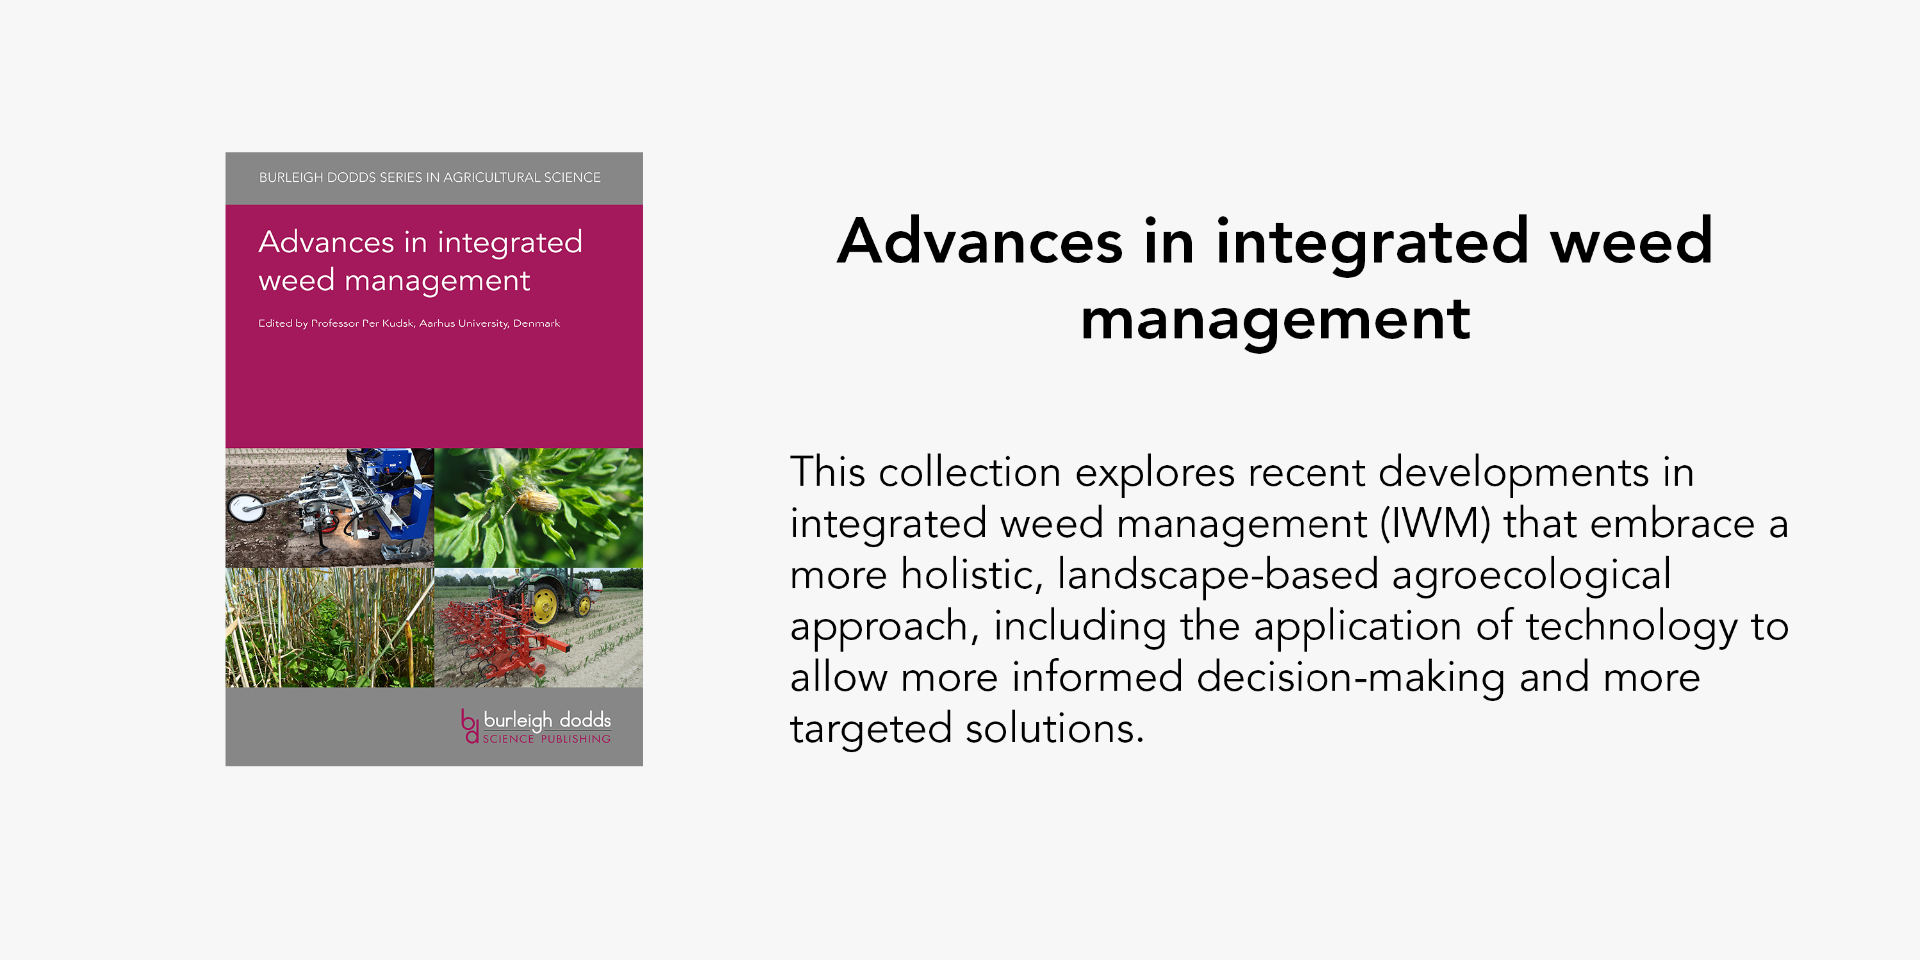 Advances in integrated weed management